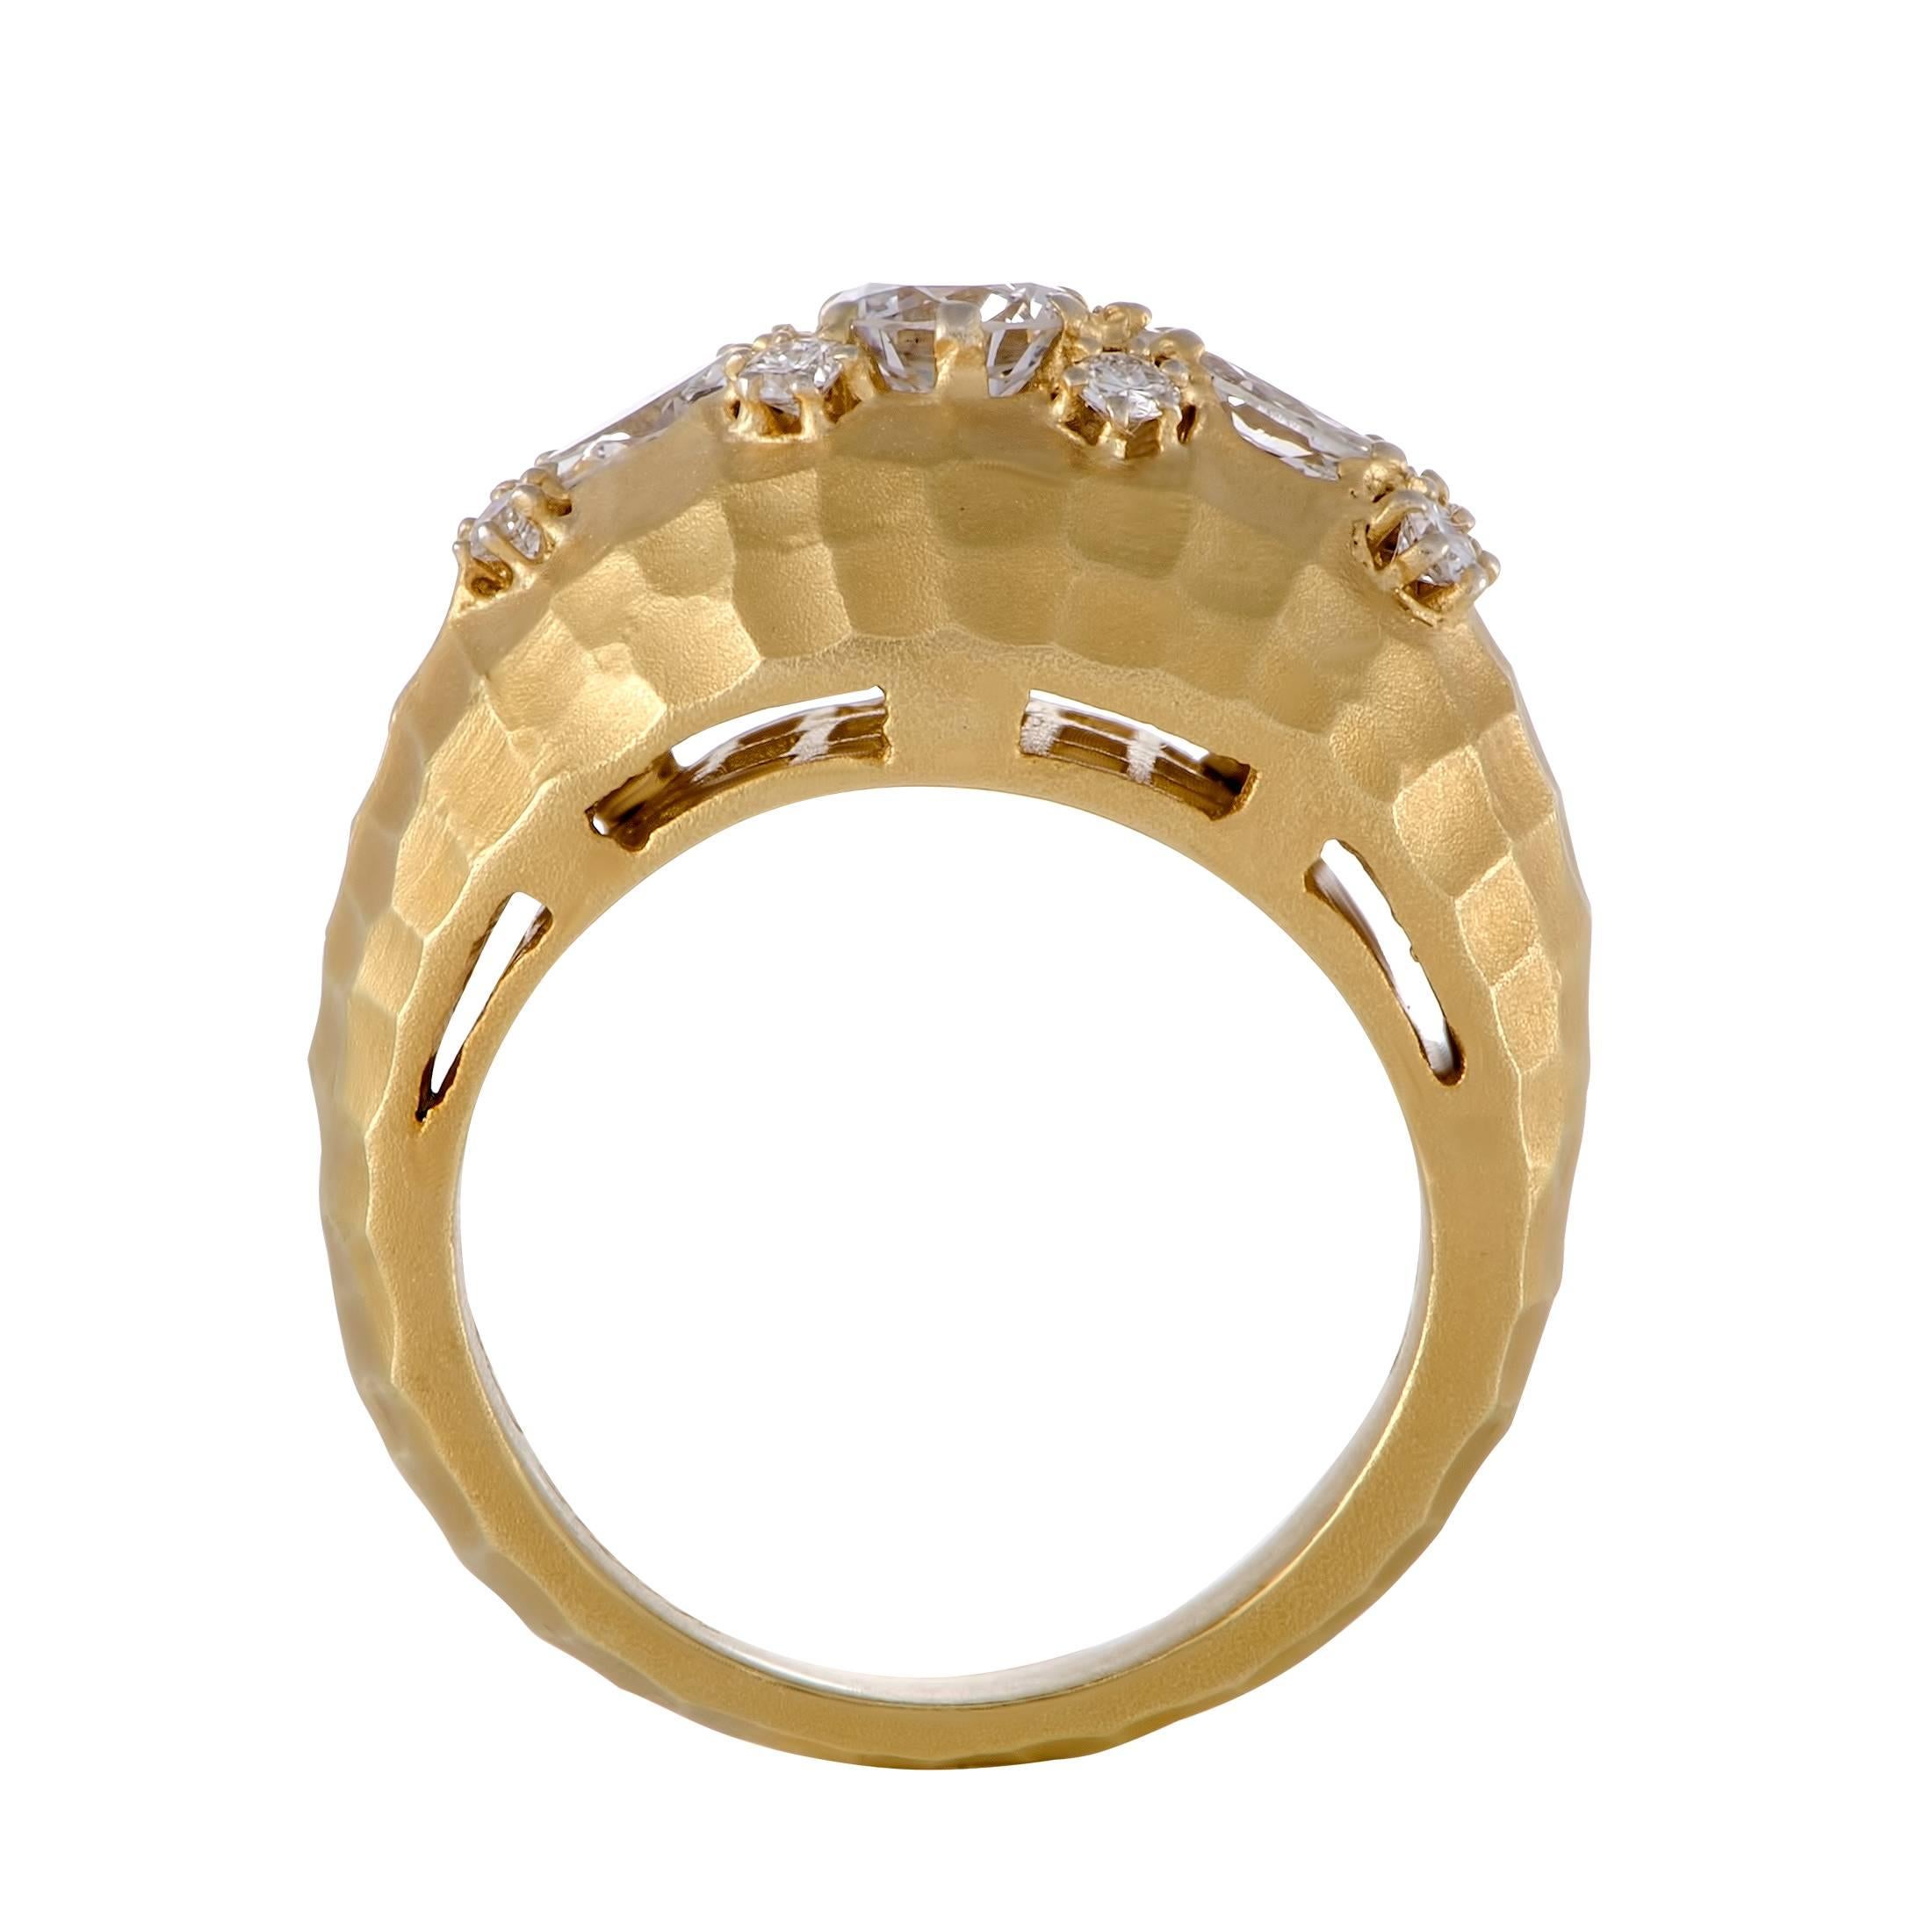 Captivating your gaze with its alluring design and resplendent décor, this spectacular ring brought to us by David Shul offers attractive fashionable look. It is made of radiant 18K yellow gold and boasts 0.65 carats of side diamonds accompanied by